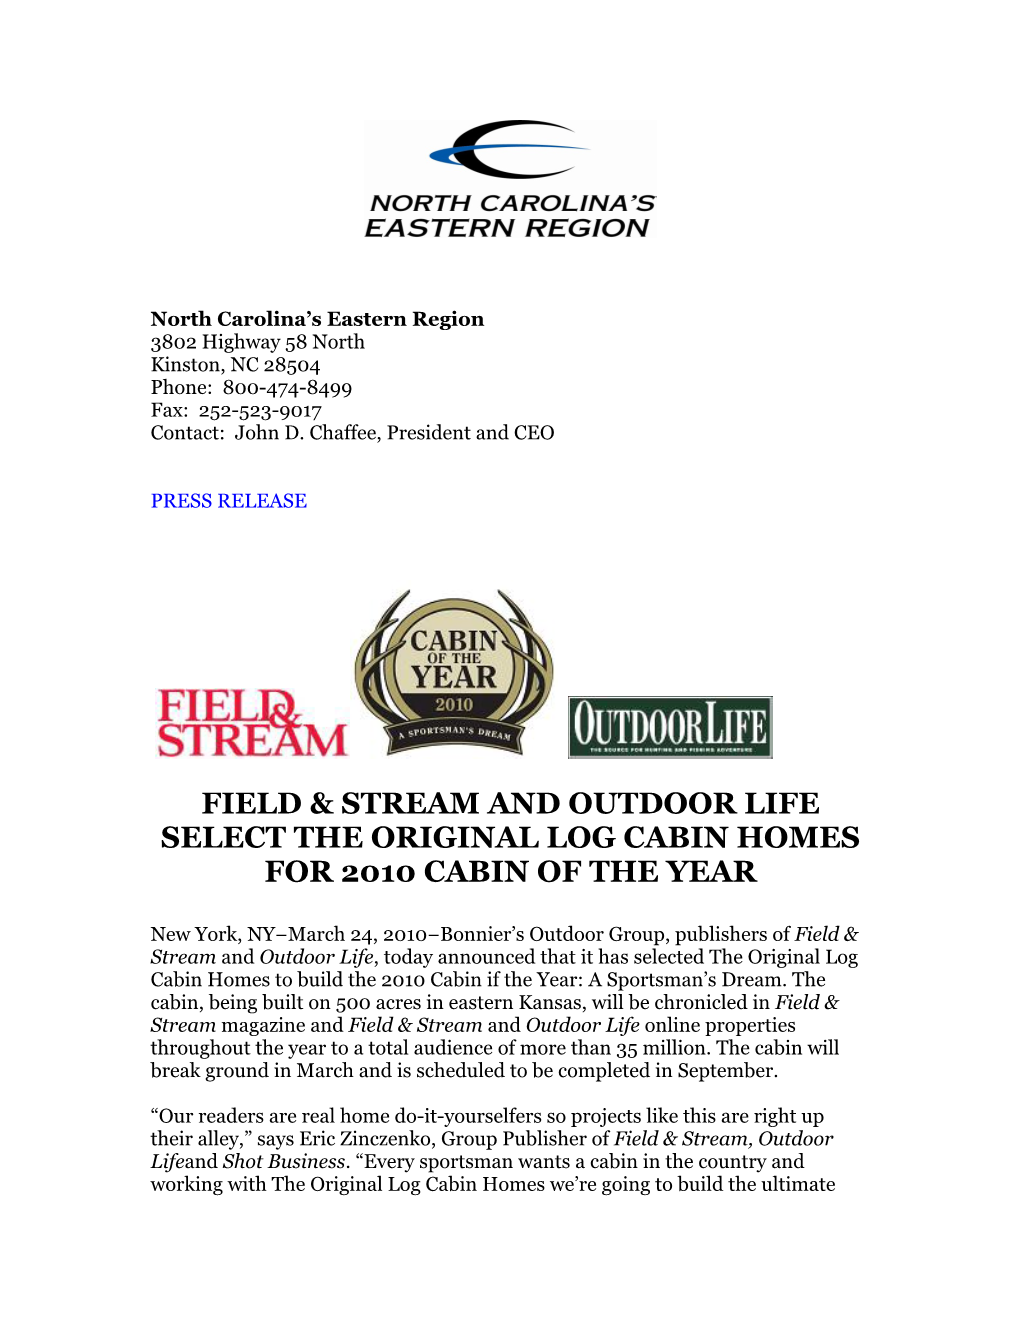 Field & Stream and Outdoor Life Select